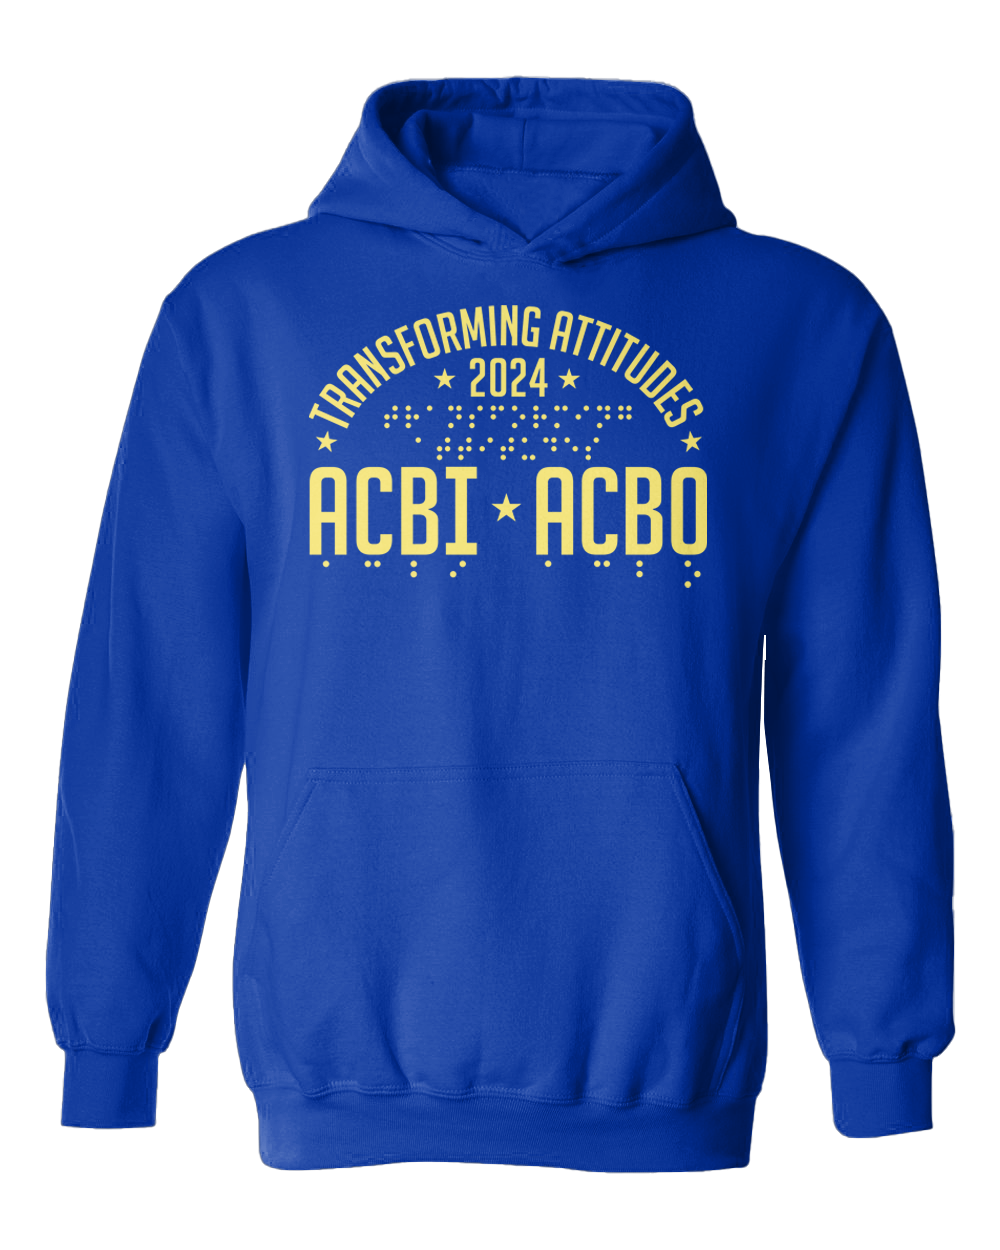 ACBI-ACBO 2024 royal blue hoodie - Shipped to your home